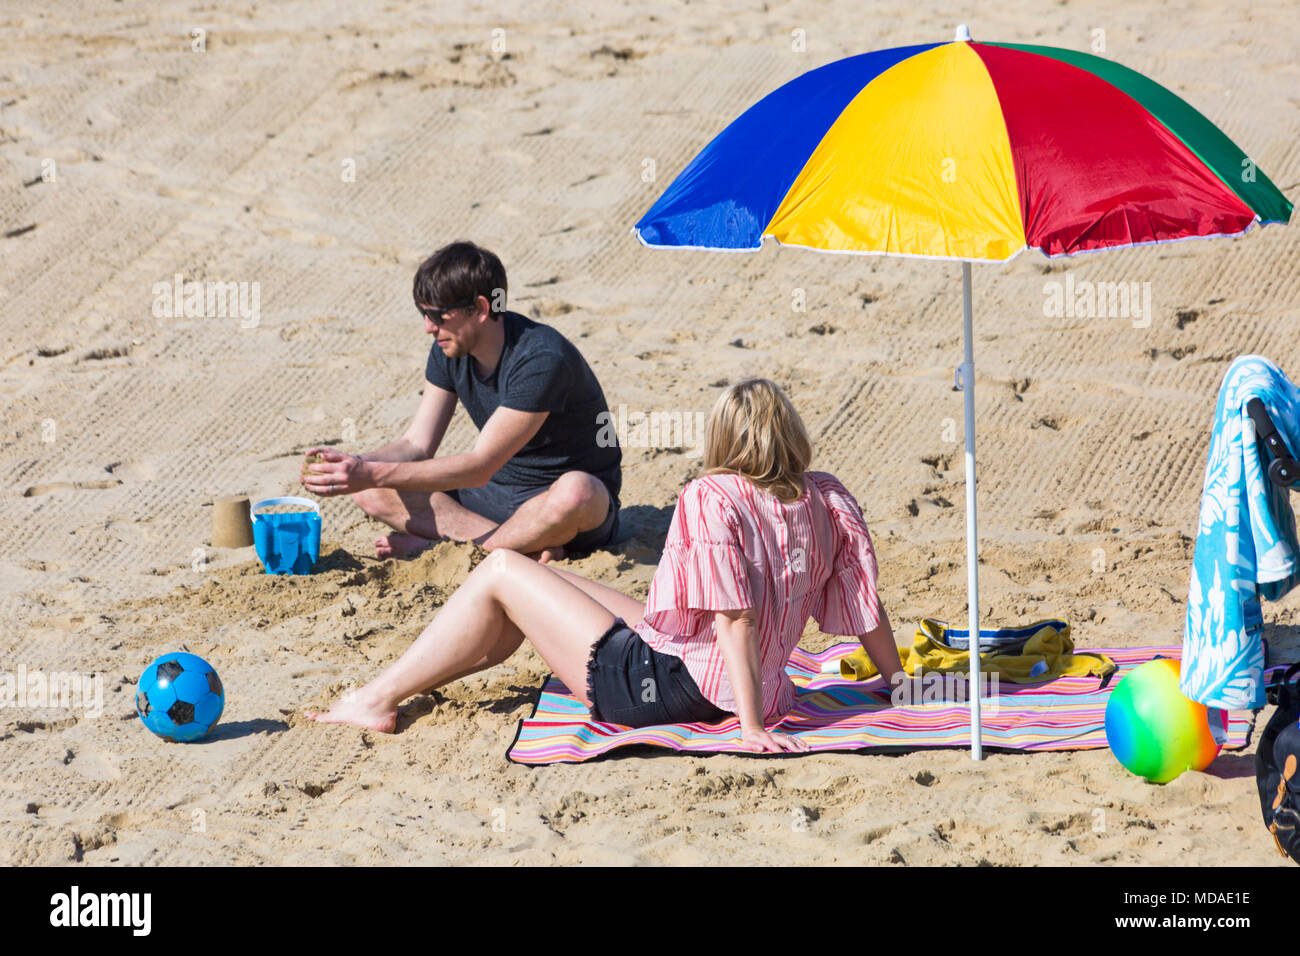 Bournemouth, Dorset, UK. 19th April 2018. UK weather: lovely warm sunny day at Bournemouth beaches with clear blue skies and unbroken sunshine, as visitors head to the seaside to enjoy the warmest day of the year so far. Couple relaxing on the beach under colourful parasol. Credit: Carolyn Jenkins/Alamy Live News Stock Photo